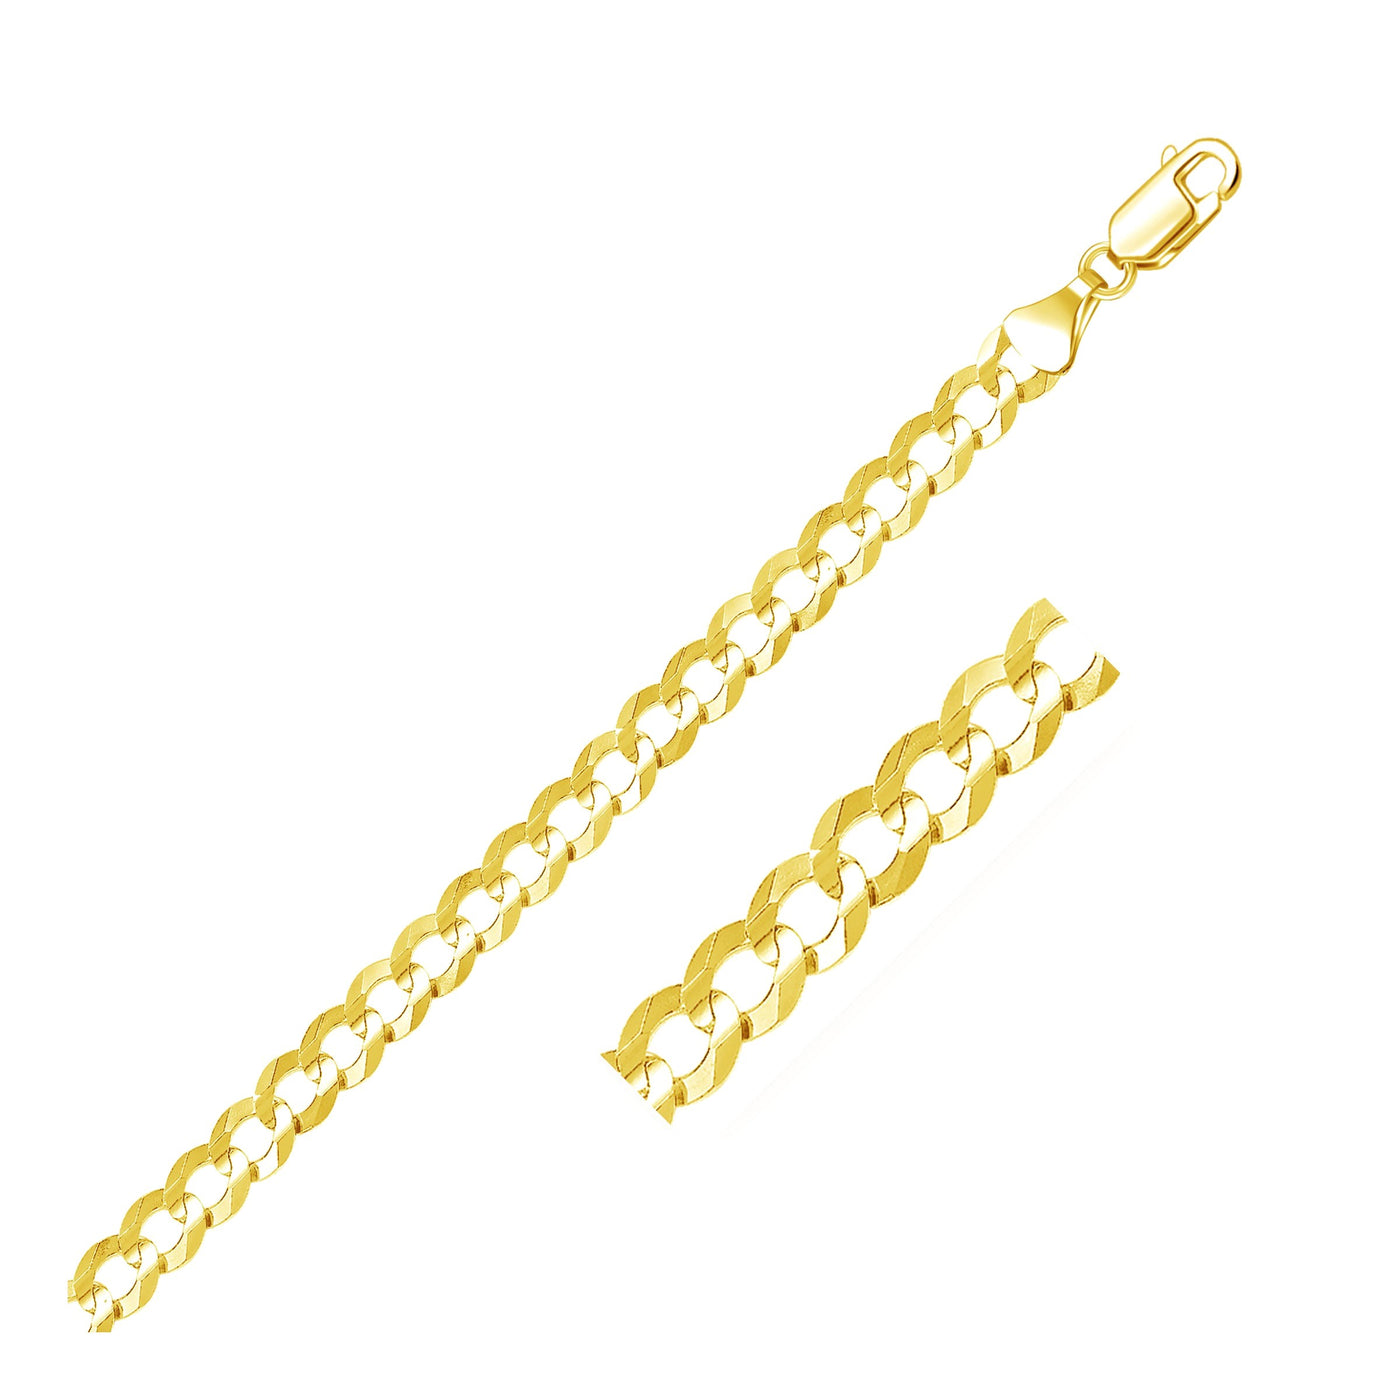 7mm 14k Yellow Gold Solid Curb Chain